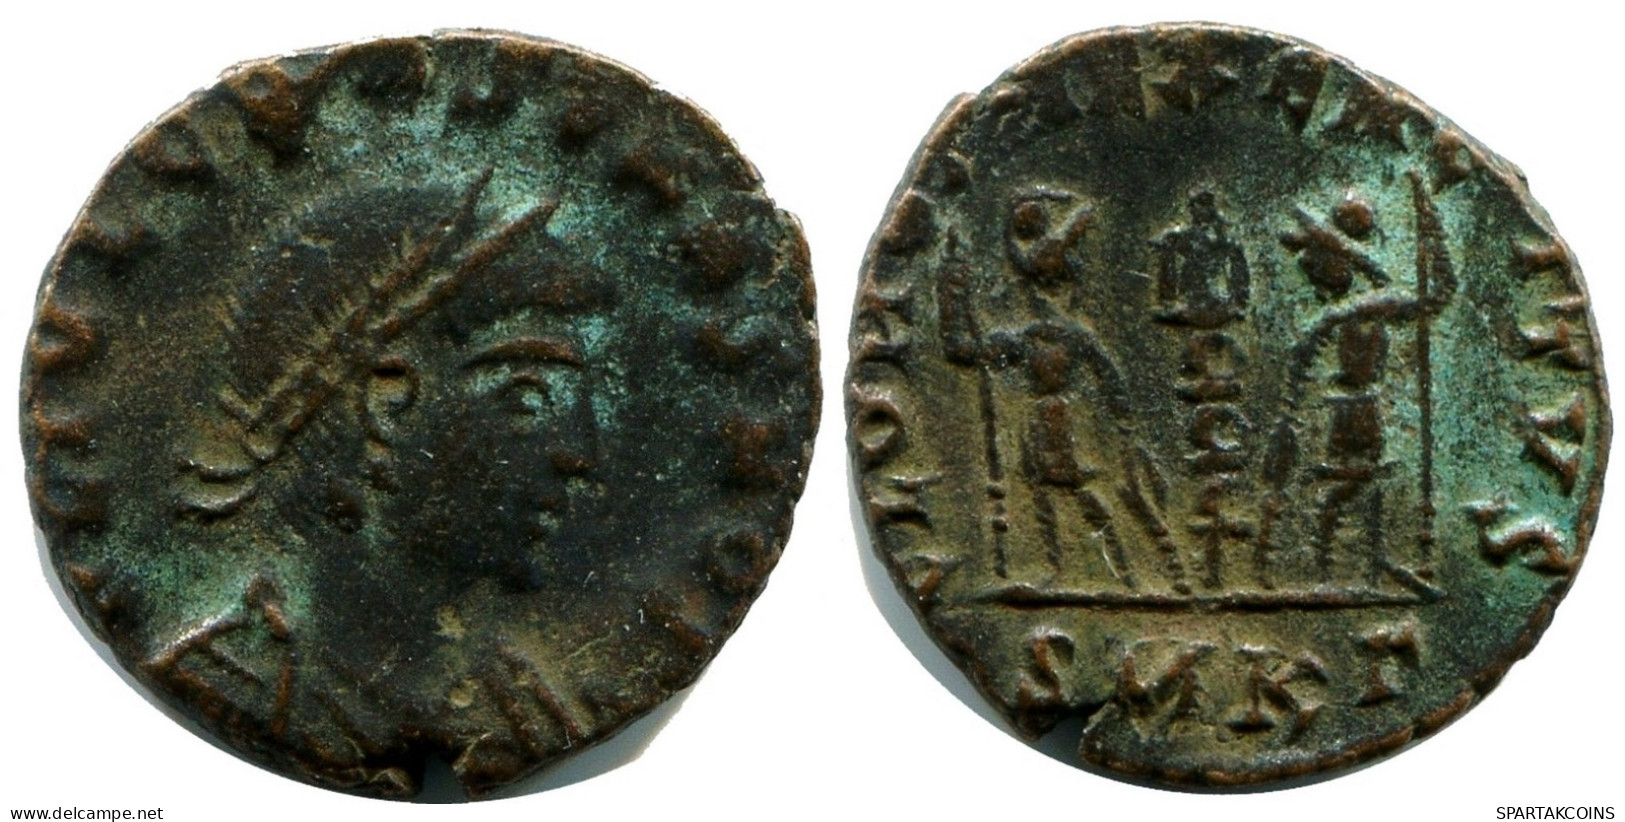 CONSTANS MINTED IN CYZICUS FROM THE ROYAL ONTARIO MUSEUM #ANC11620.14.F.A - The Christian Empire (307 AD To 363 AD)